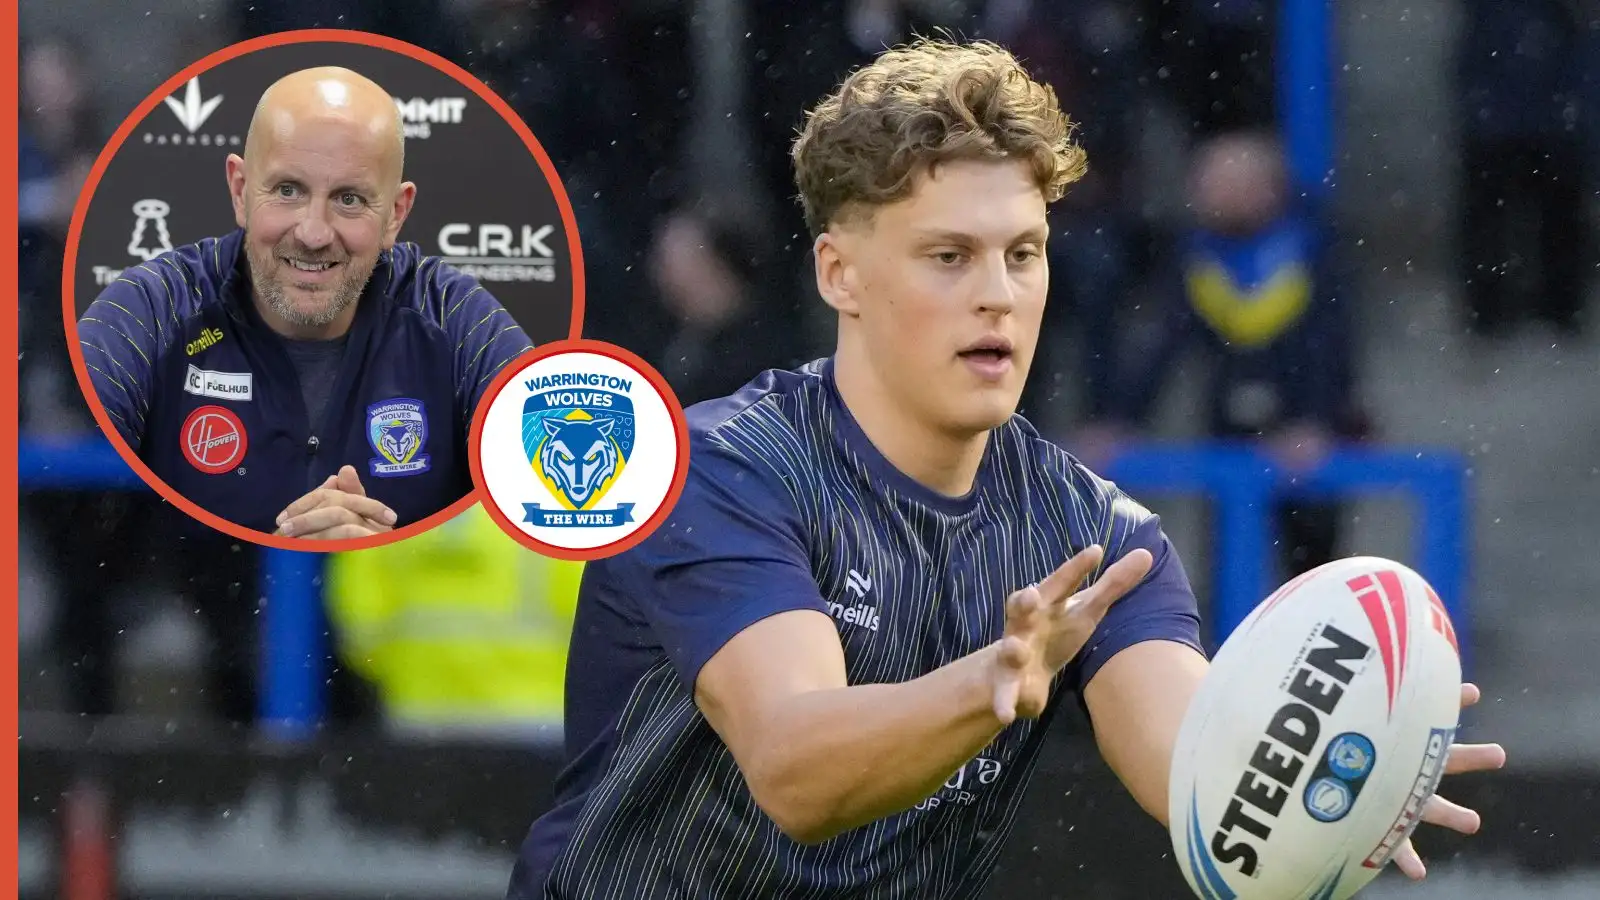 NextGen: Meet the ‘pretty special athlete’ waiting in the wings at Warrington Wolves